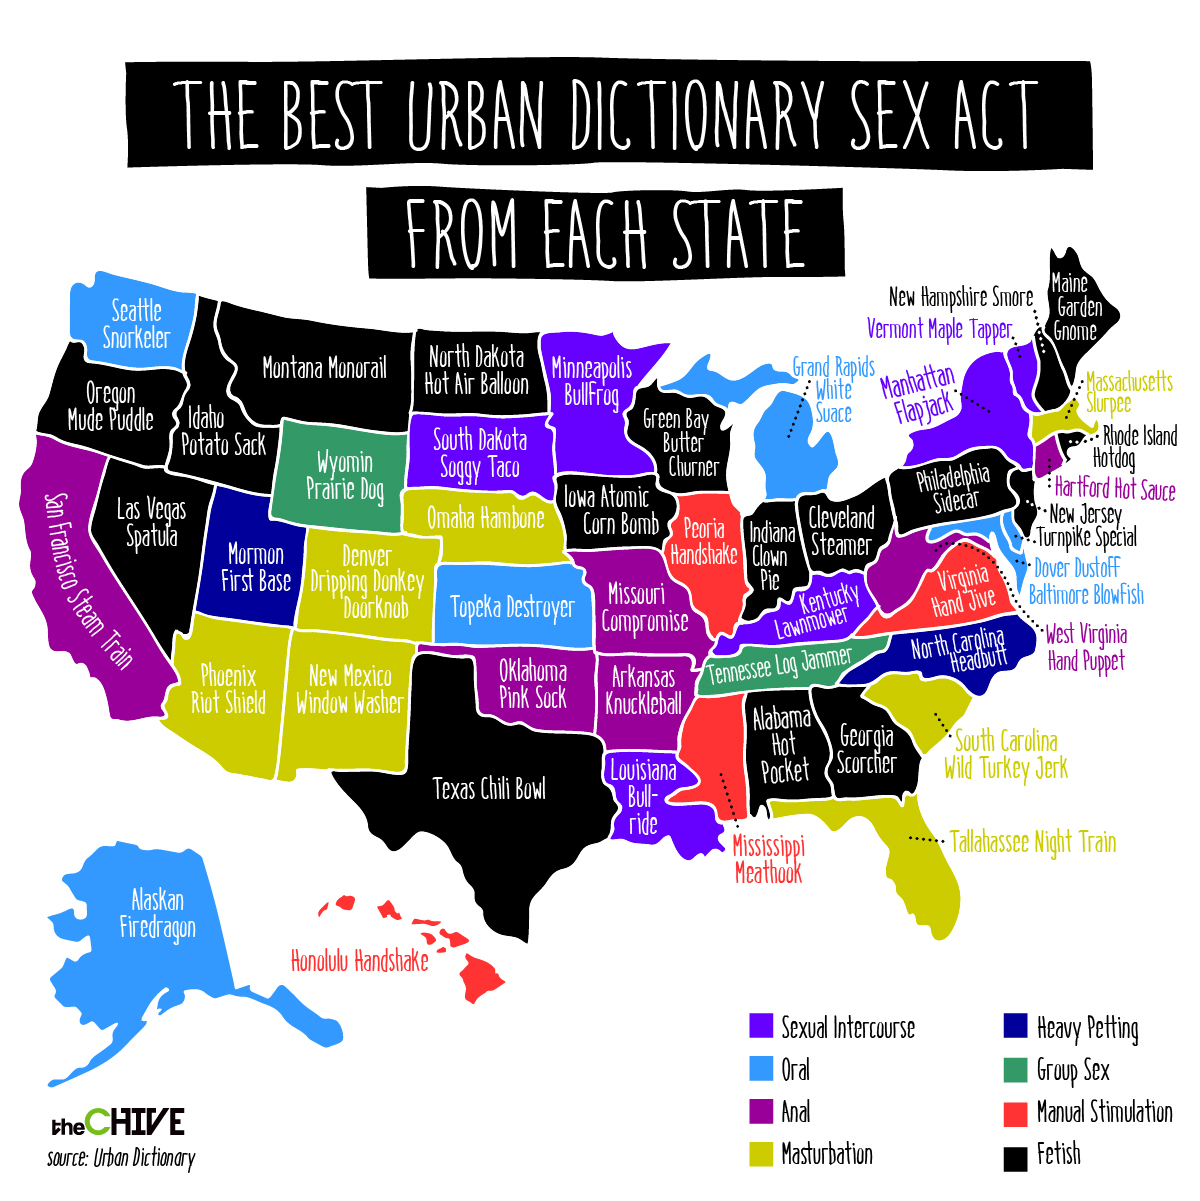 Heres The “Best” Urban Dictionary Sex Act From Each State  picture